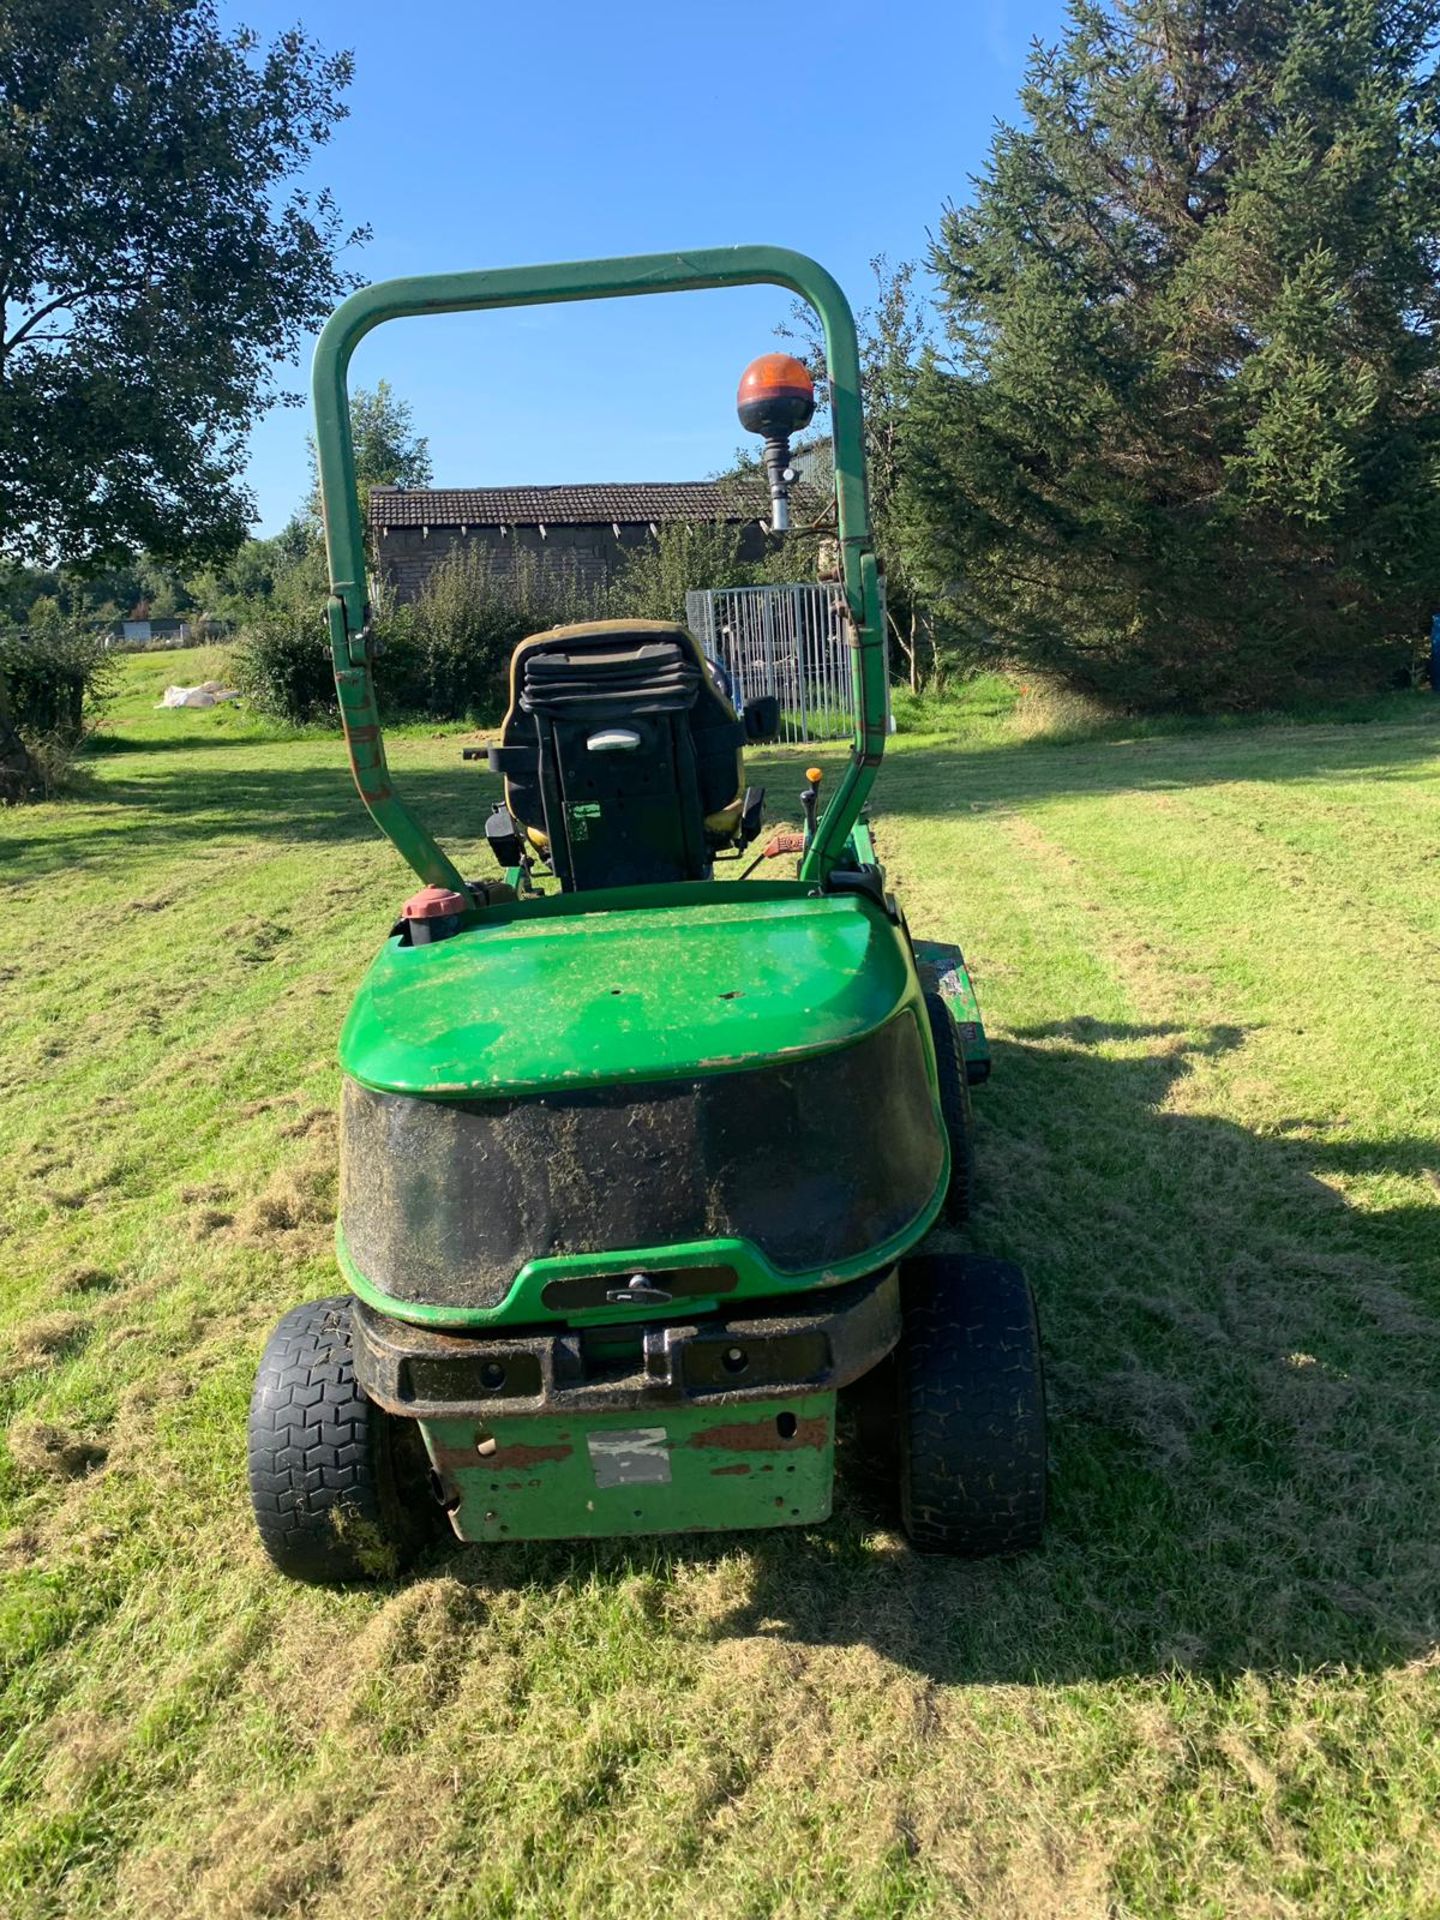 JOHN DEERE 1445 SERIES II 4WD RIDE ON DIESEL LAWN MOWER C/W OUT-FRONT ROTARY CUTTING DECK *PLUS VAT* - Image 11 of 14